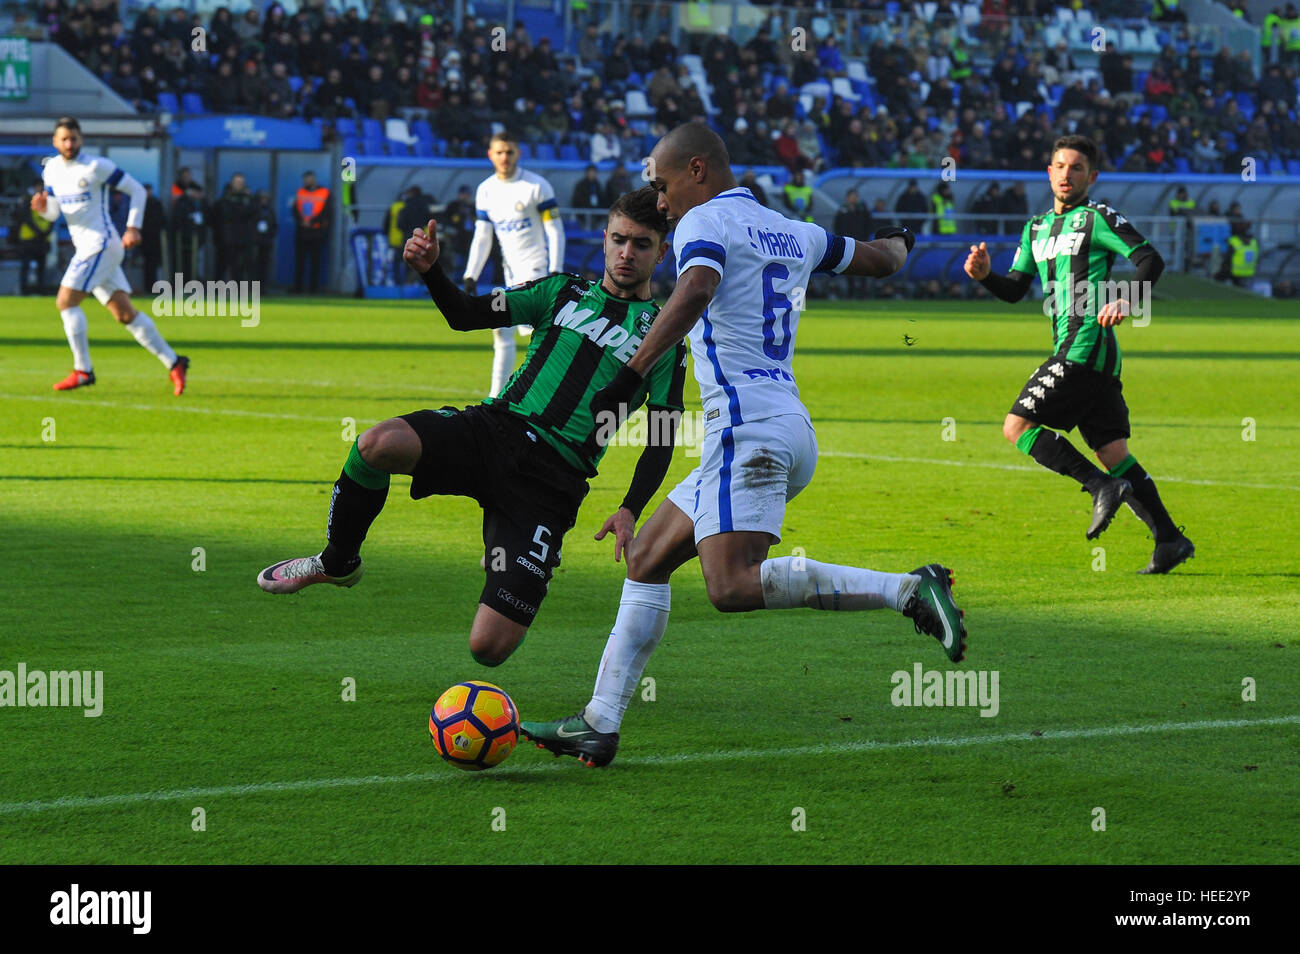 US Sassuolo Calcio vs F.C. Internazionale Milano serie A football championship 2016 2017 US Sassuolo Calcio vs F.C. Internazionale Milano Reggio Emilia Mapei Stadium 18/12/2016 F.C. Internazionale Milano beat Sassuolo for 1 to 0 thanks to goal scored by Antonio Candreva In the pic: Joao Mário Naval da Costa Eduardo F.C. Internazionale Milano's midfielder and national team of Portugal and Luca Antei Sassuolo's defender fight for the ball during the serie A football match between US Sassuolo Calcio and F.C. Internazionale Milano at Mapei Stadium in Reggio Emilia ph Massimo Morelli (Photo by Mass Stock Photo